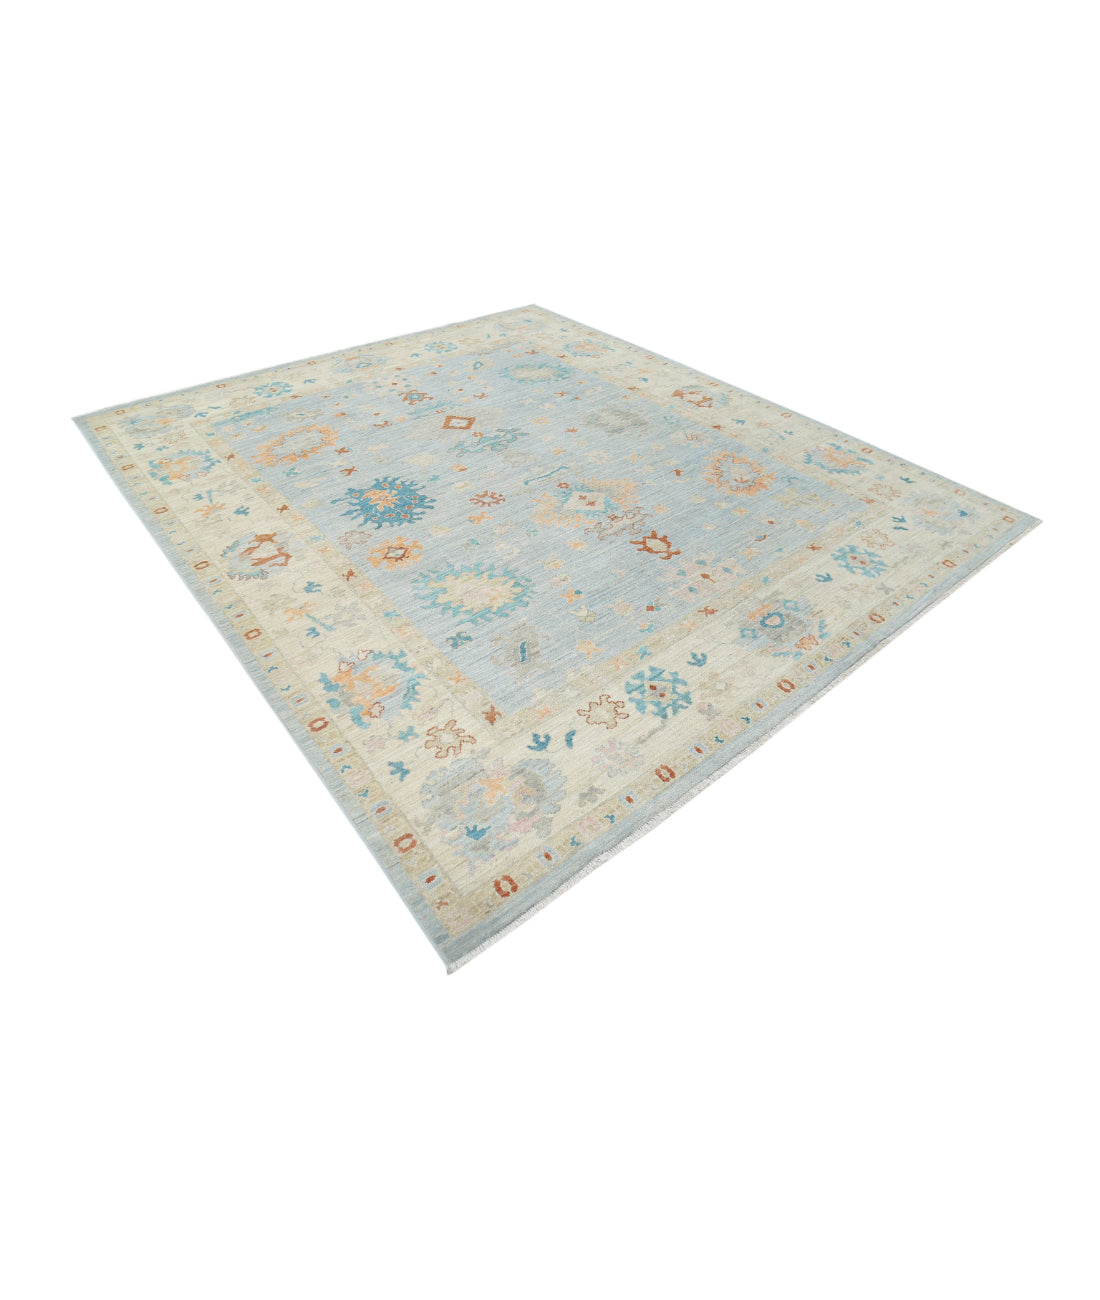 Hand Knotted Oushak Wool Rug - 8'4'' x 9'8'' 8'4'' x 9'8'' (250 X 290) / Blue / Ivory